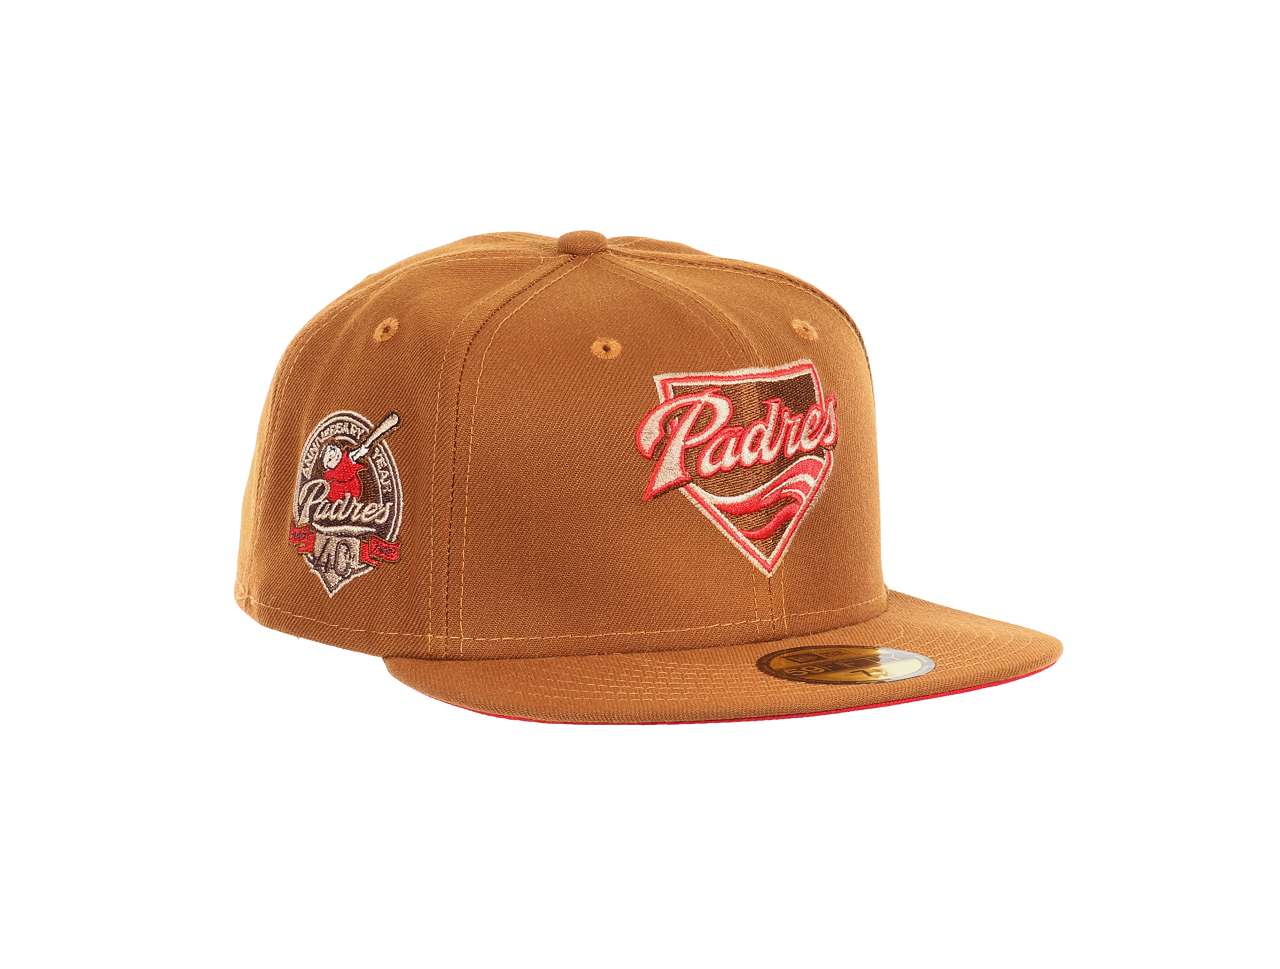 San Diego Padres MLB 40th Anniversary Sidepatch Toasted Peanut 59Fifty Basecap New Era